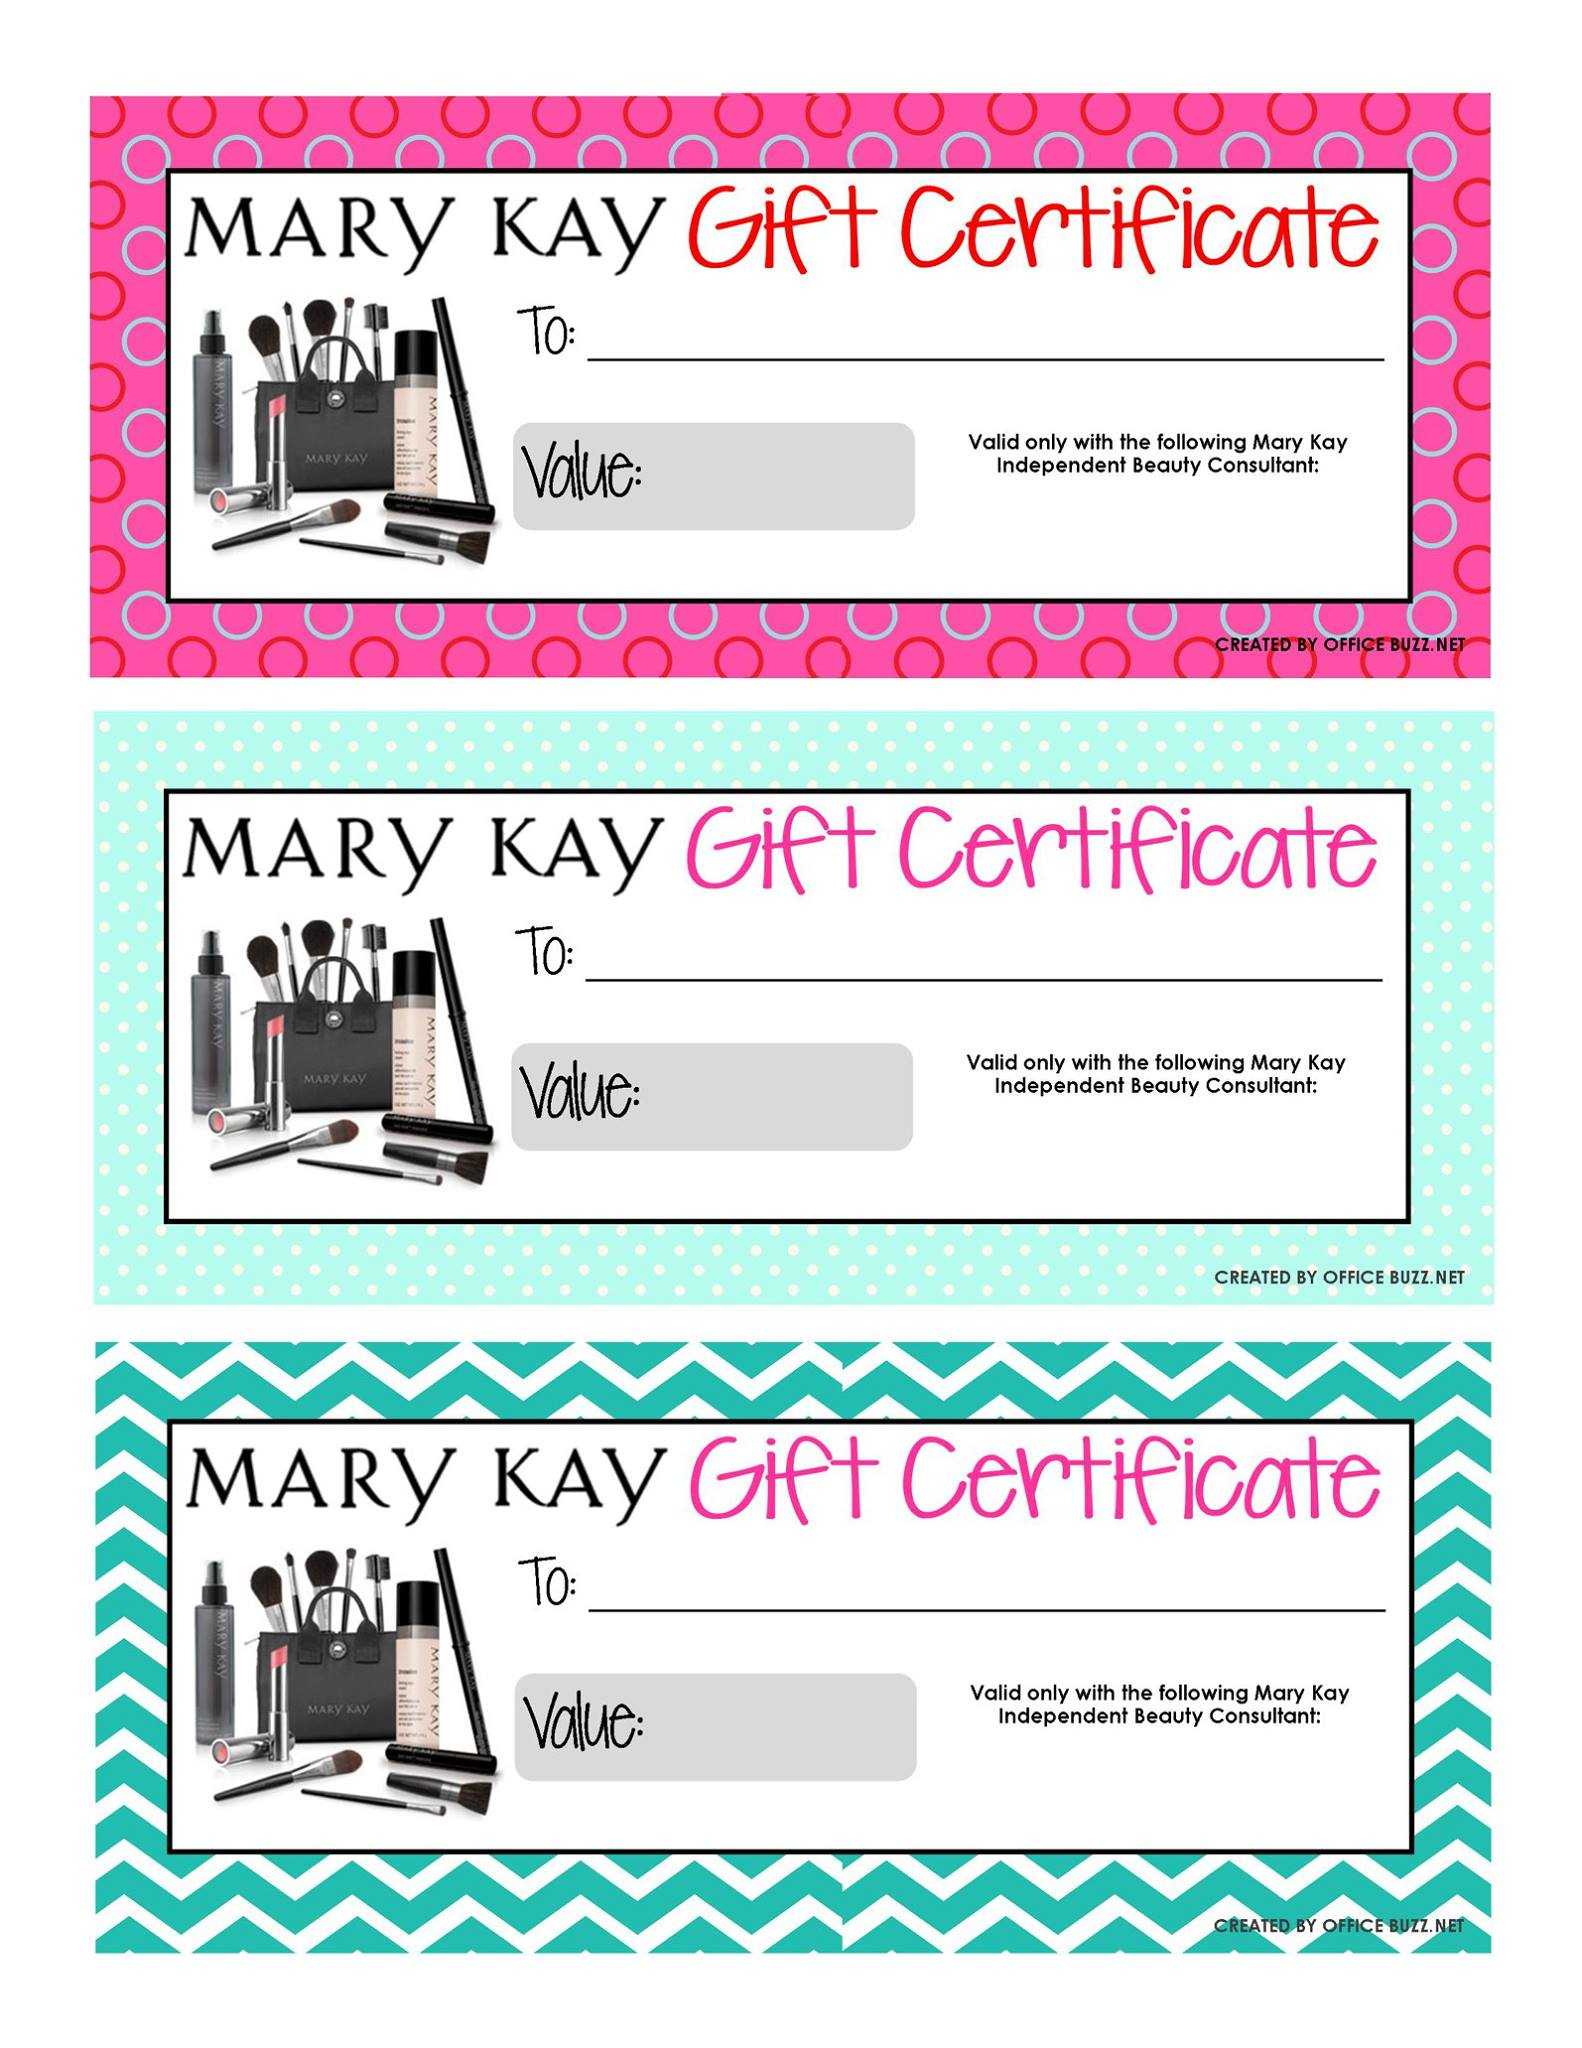 mary-kay-gift-certificates-free-template-infoupdate-org-mary-kay-my